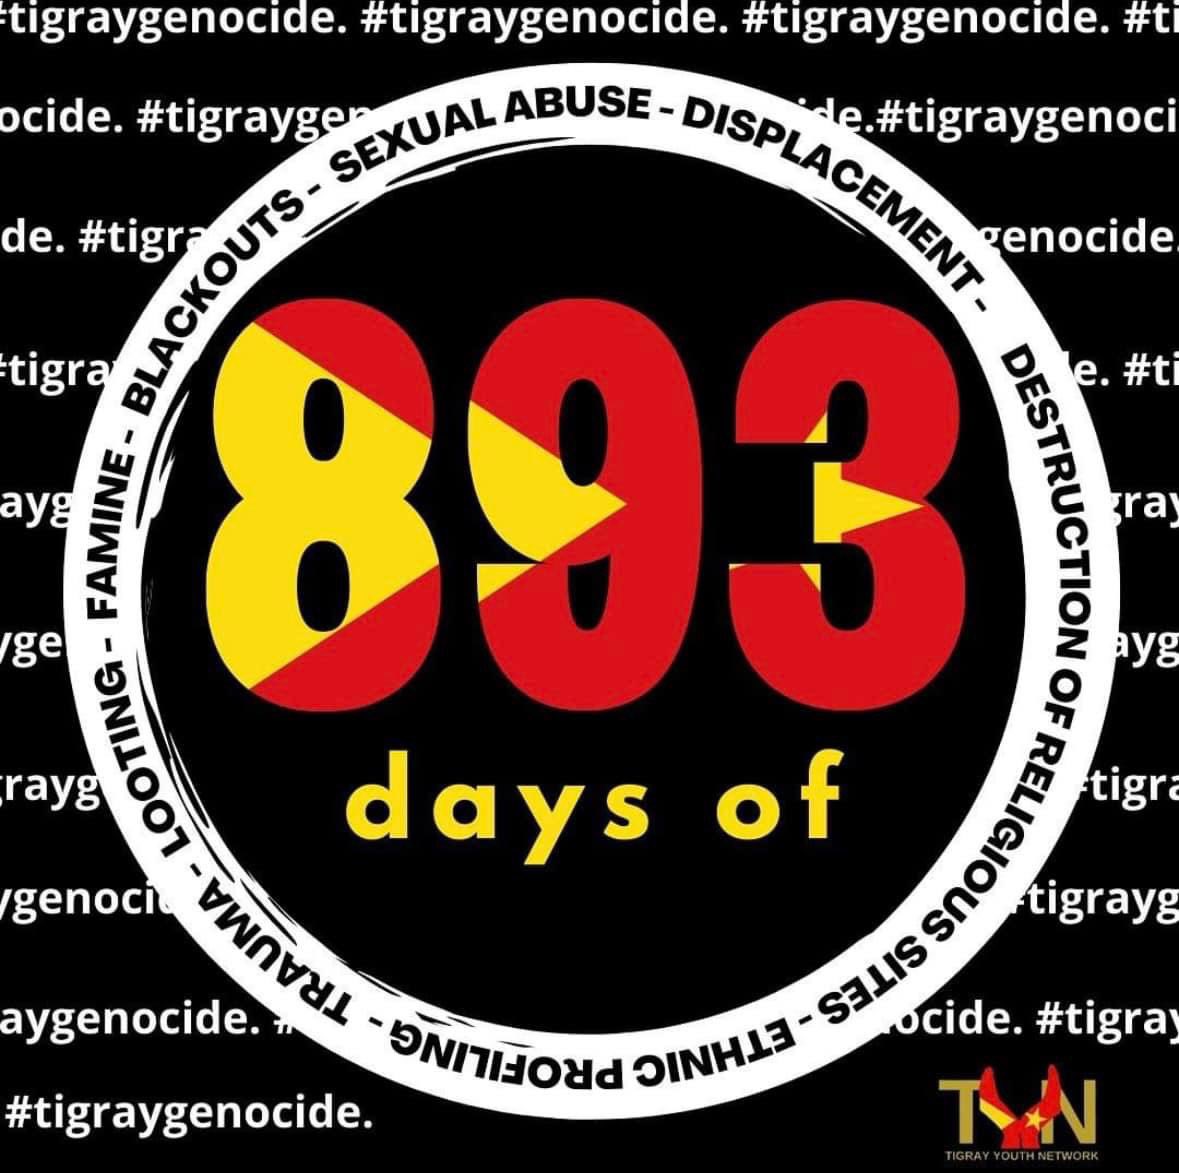 #893days of #TigrayGenocied 
⭕️ Still #TigrayIsBleeding: 
The situation in #Irob and #Kunama in #Tigray occupied and shelled by #Eritrea is devastating, with large scale displacement of the civilian population. 
#FreeTigray 
#FreeIrobAndKunama 
@UN_HRC @UNOCHA @JosepBorrellF…